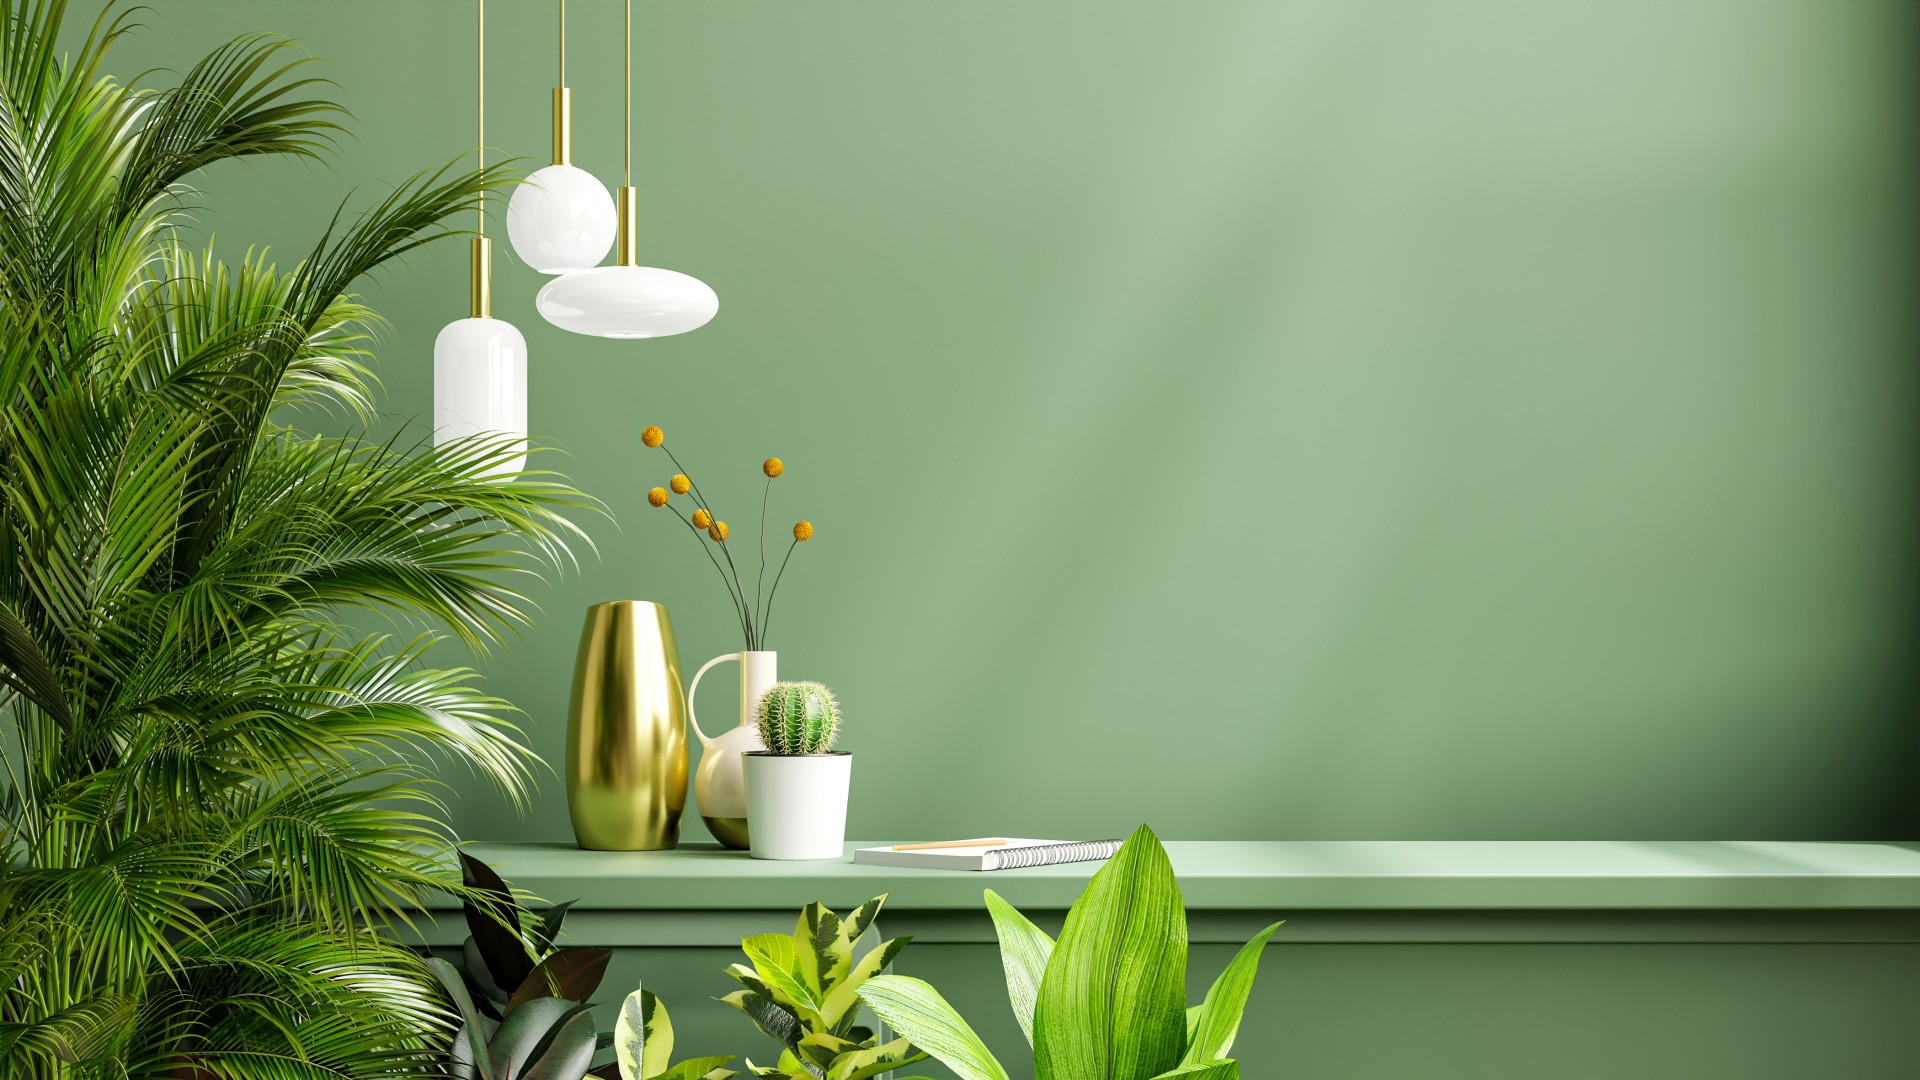 Green wall mockup with green plant shelf 3d rendering